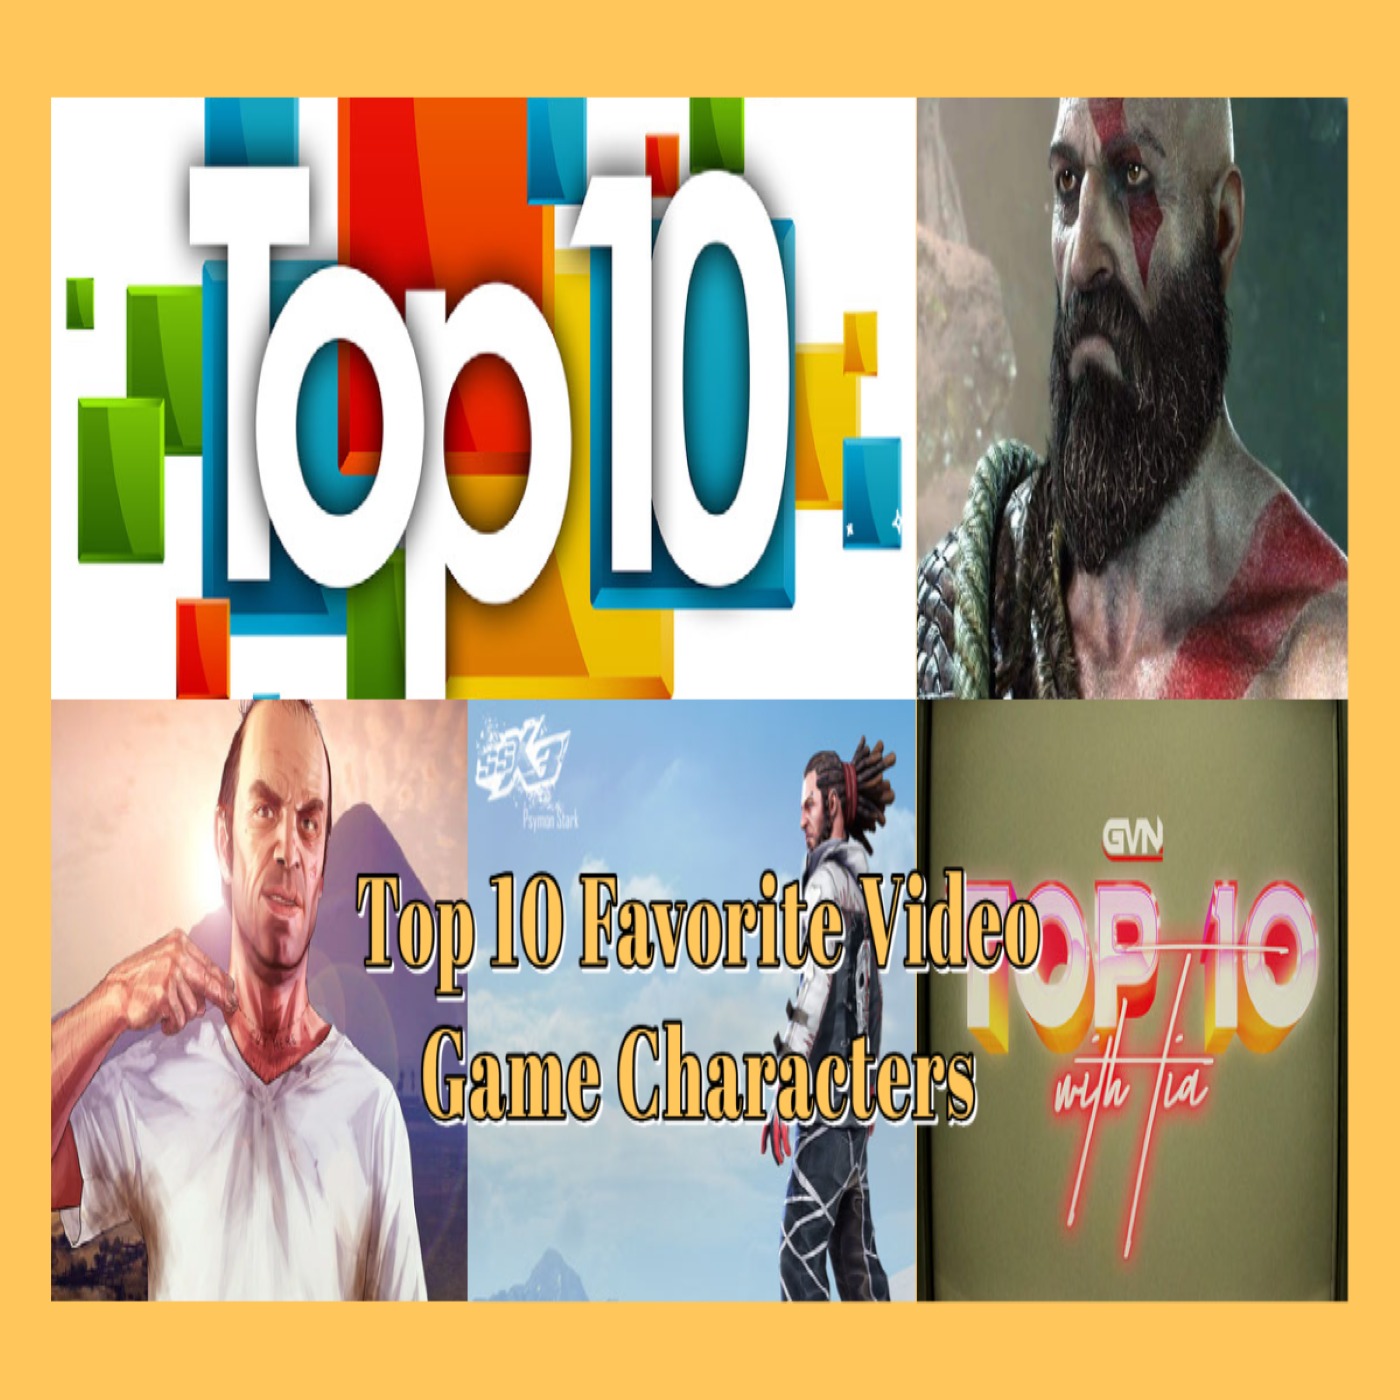 Top 10 Favorite Video Game Characters